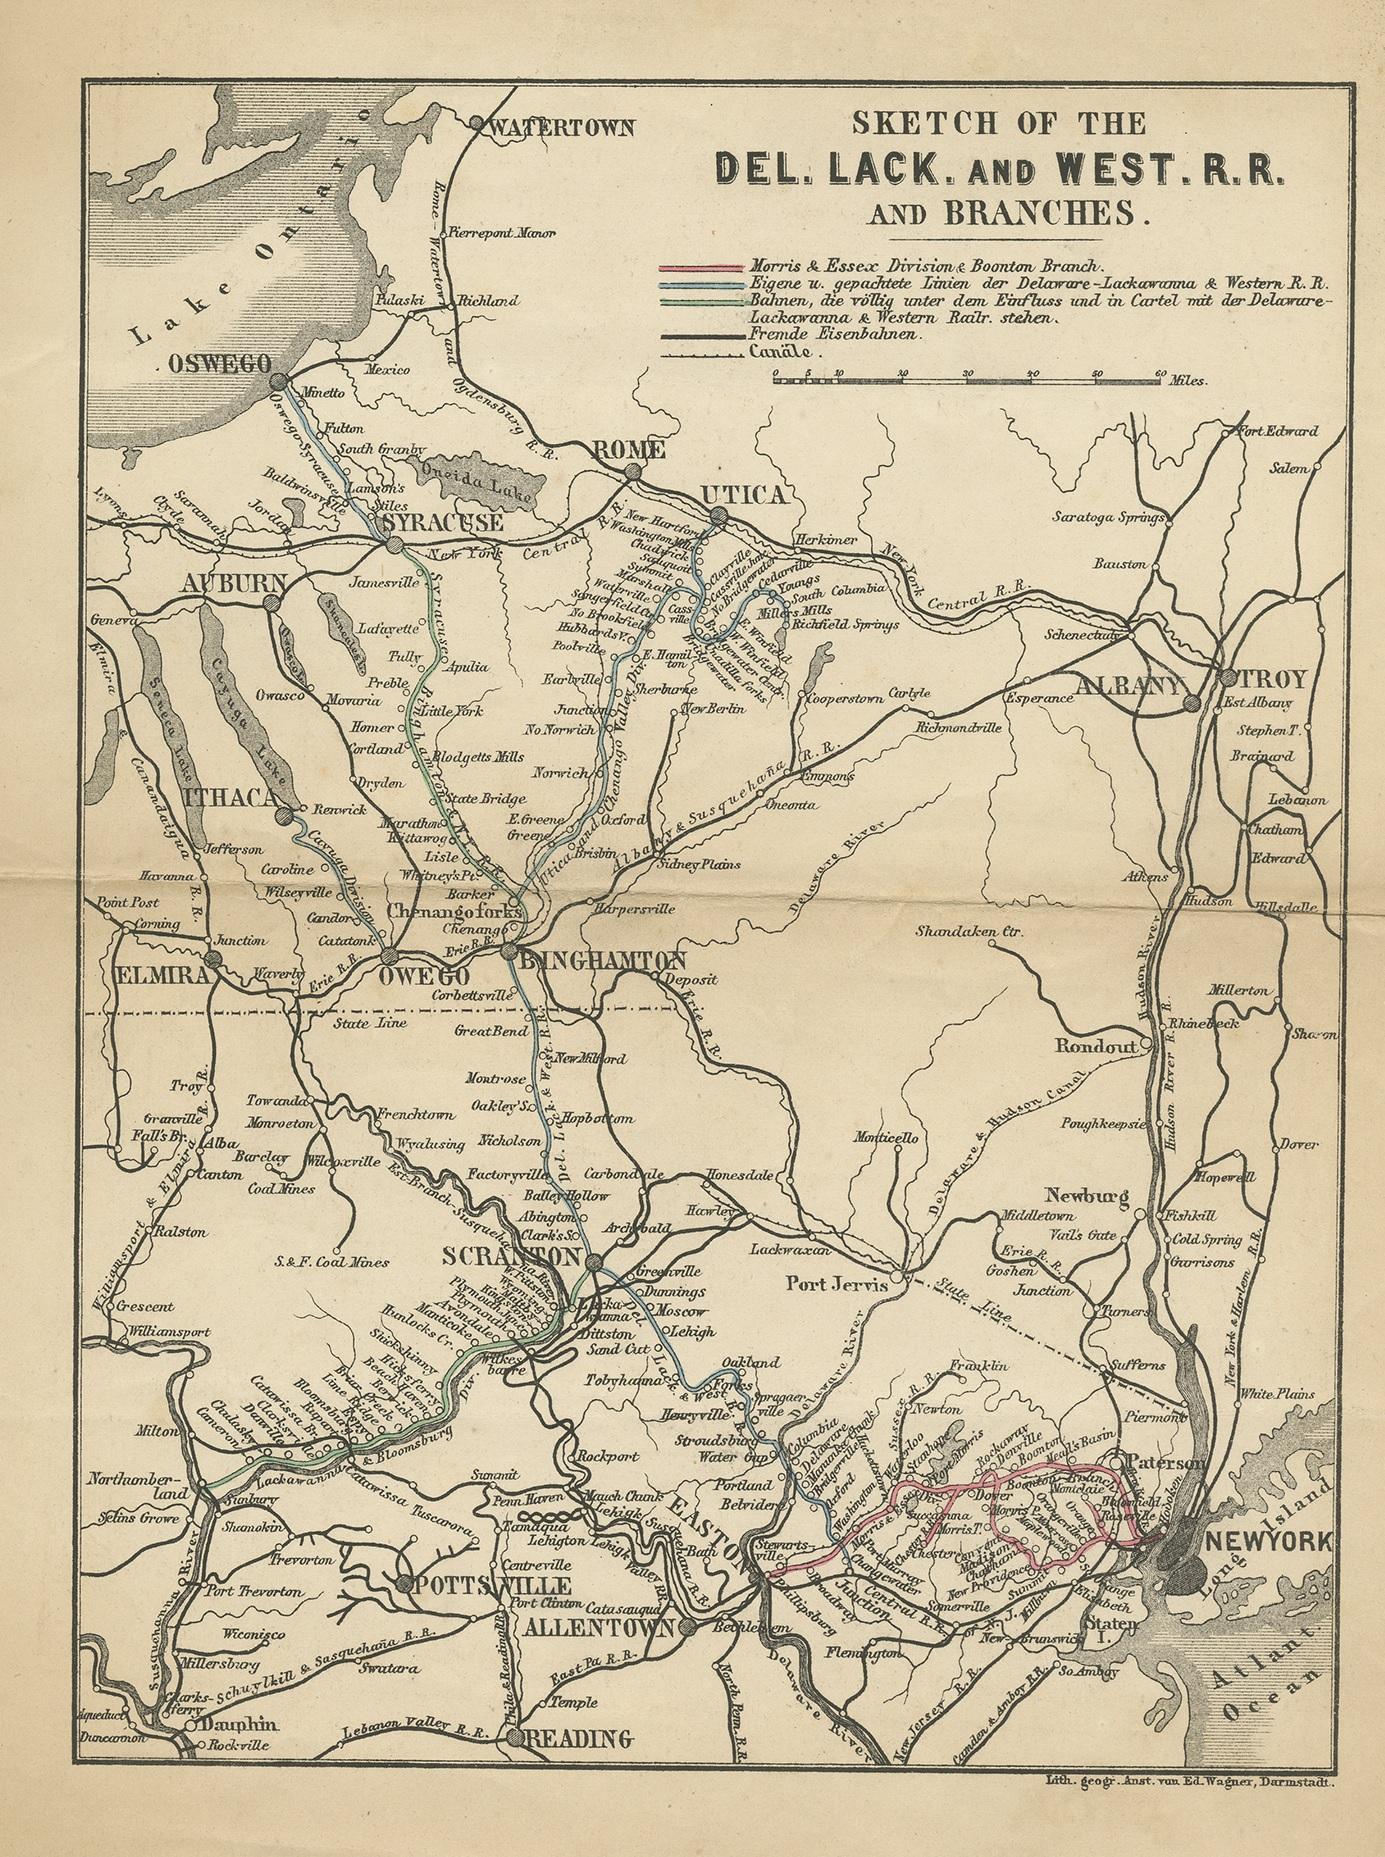 Antique map titled 'Sketch of the Del. Lack and West R.R. and Branches'. Lithographed map of the railway in the region of New York, Pottersville, Scranton, Ithaca, Oswego, Albany and Utica. Lithographed by Ed. Wagner Darmstadt.